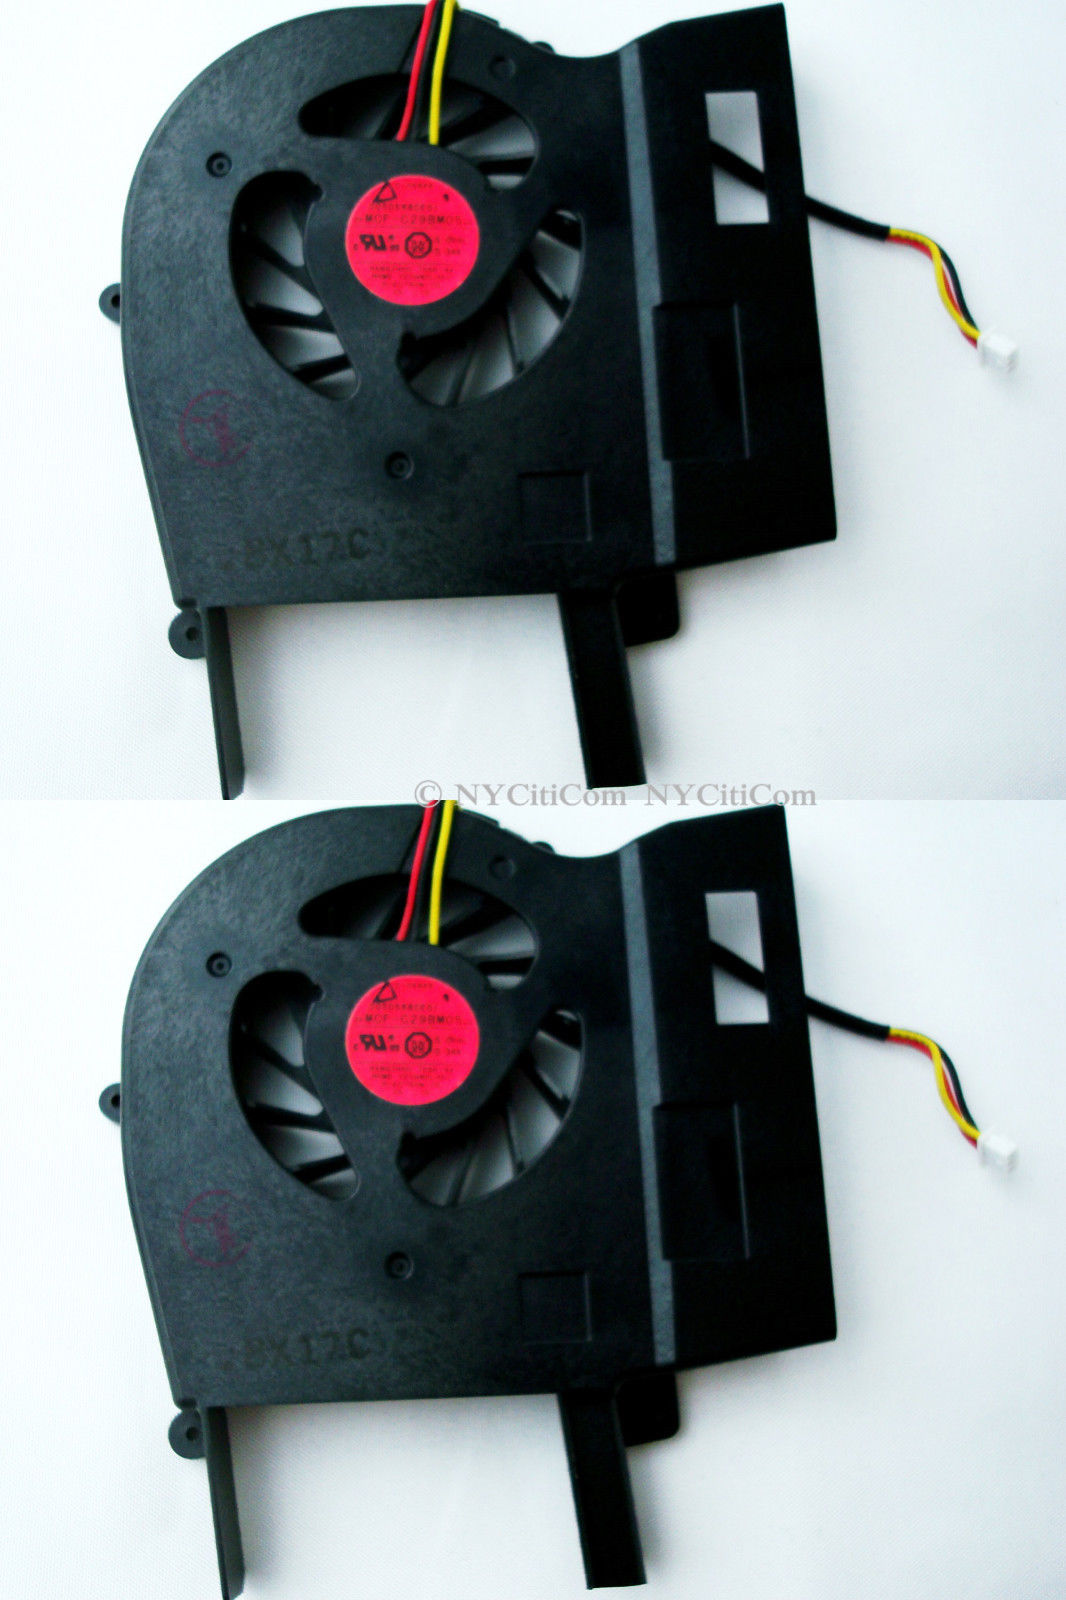 New 2 pieces CPU Fan For SONY VAIO PCG-3C2L E105866 DQ5D566CE01 MCF-C29BM05